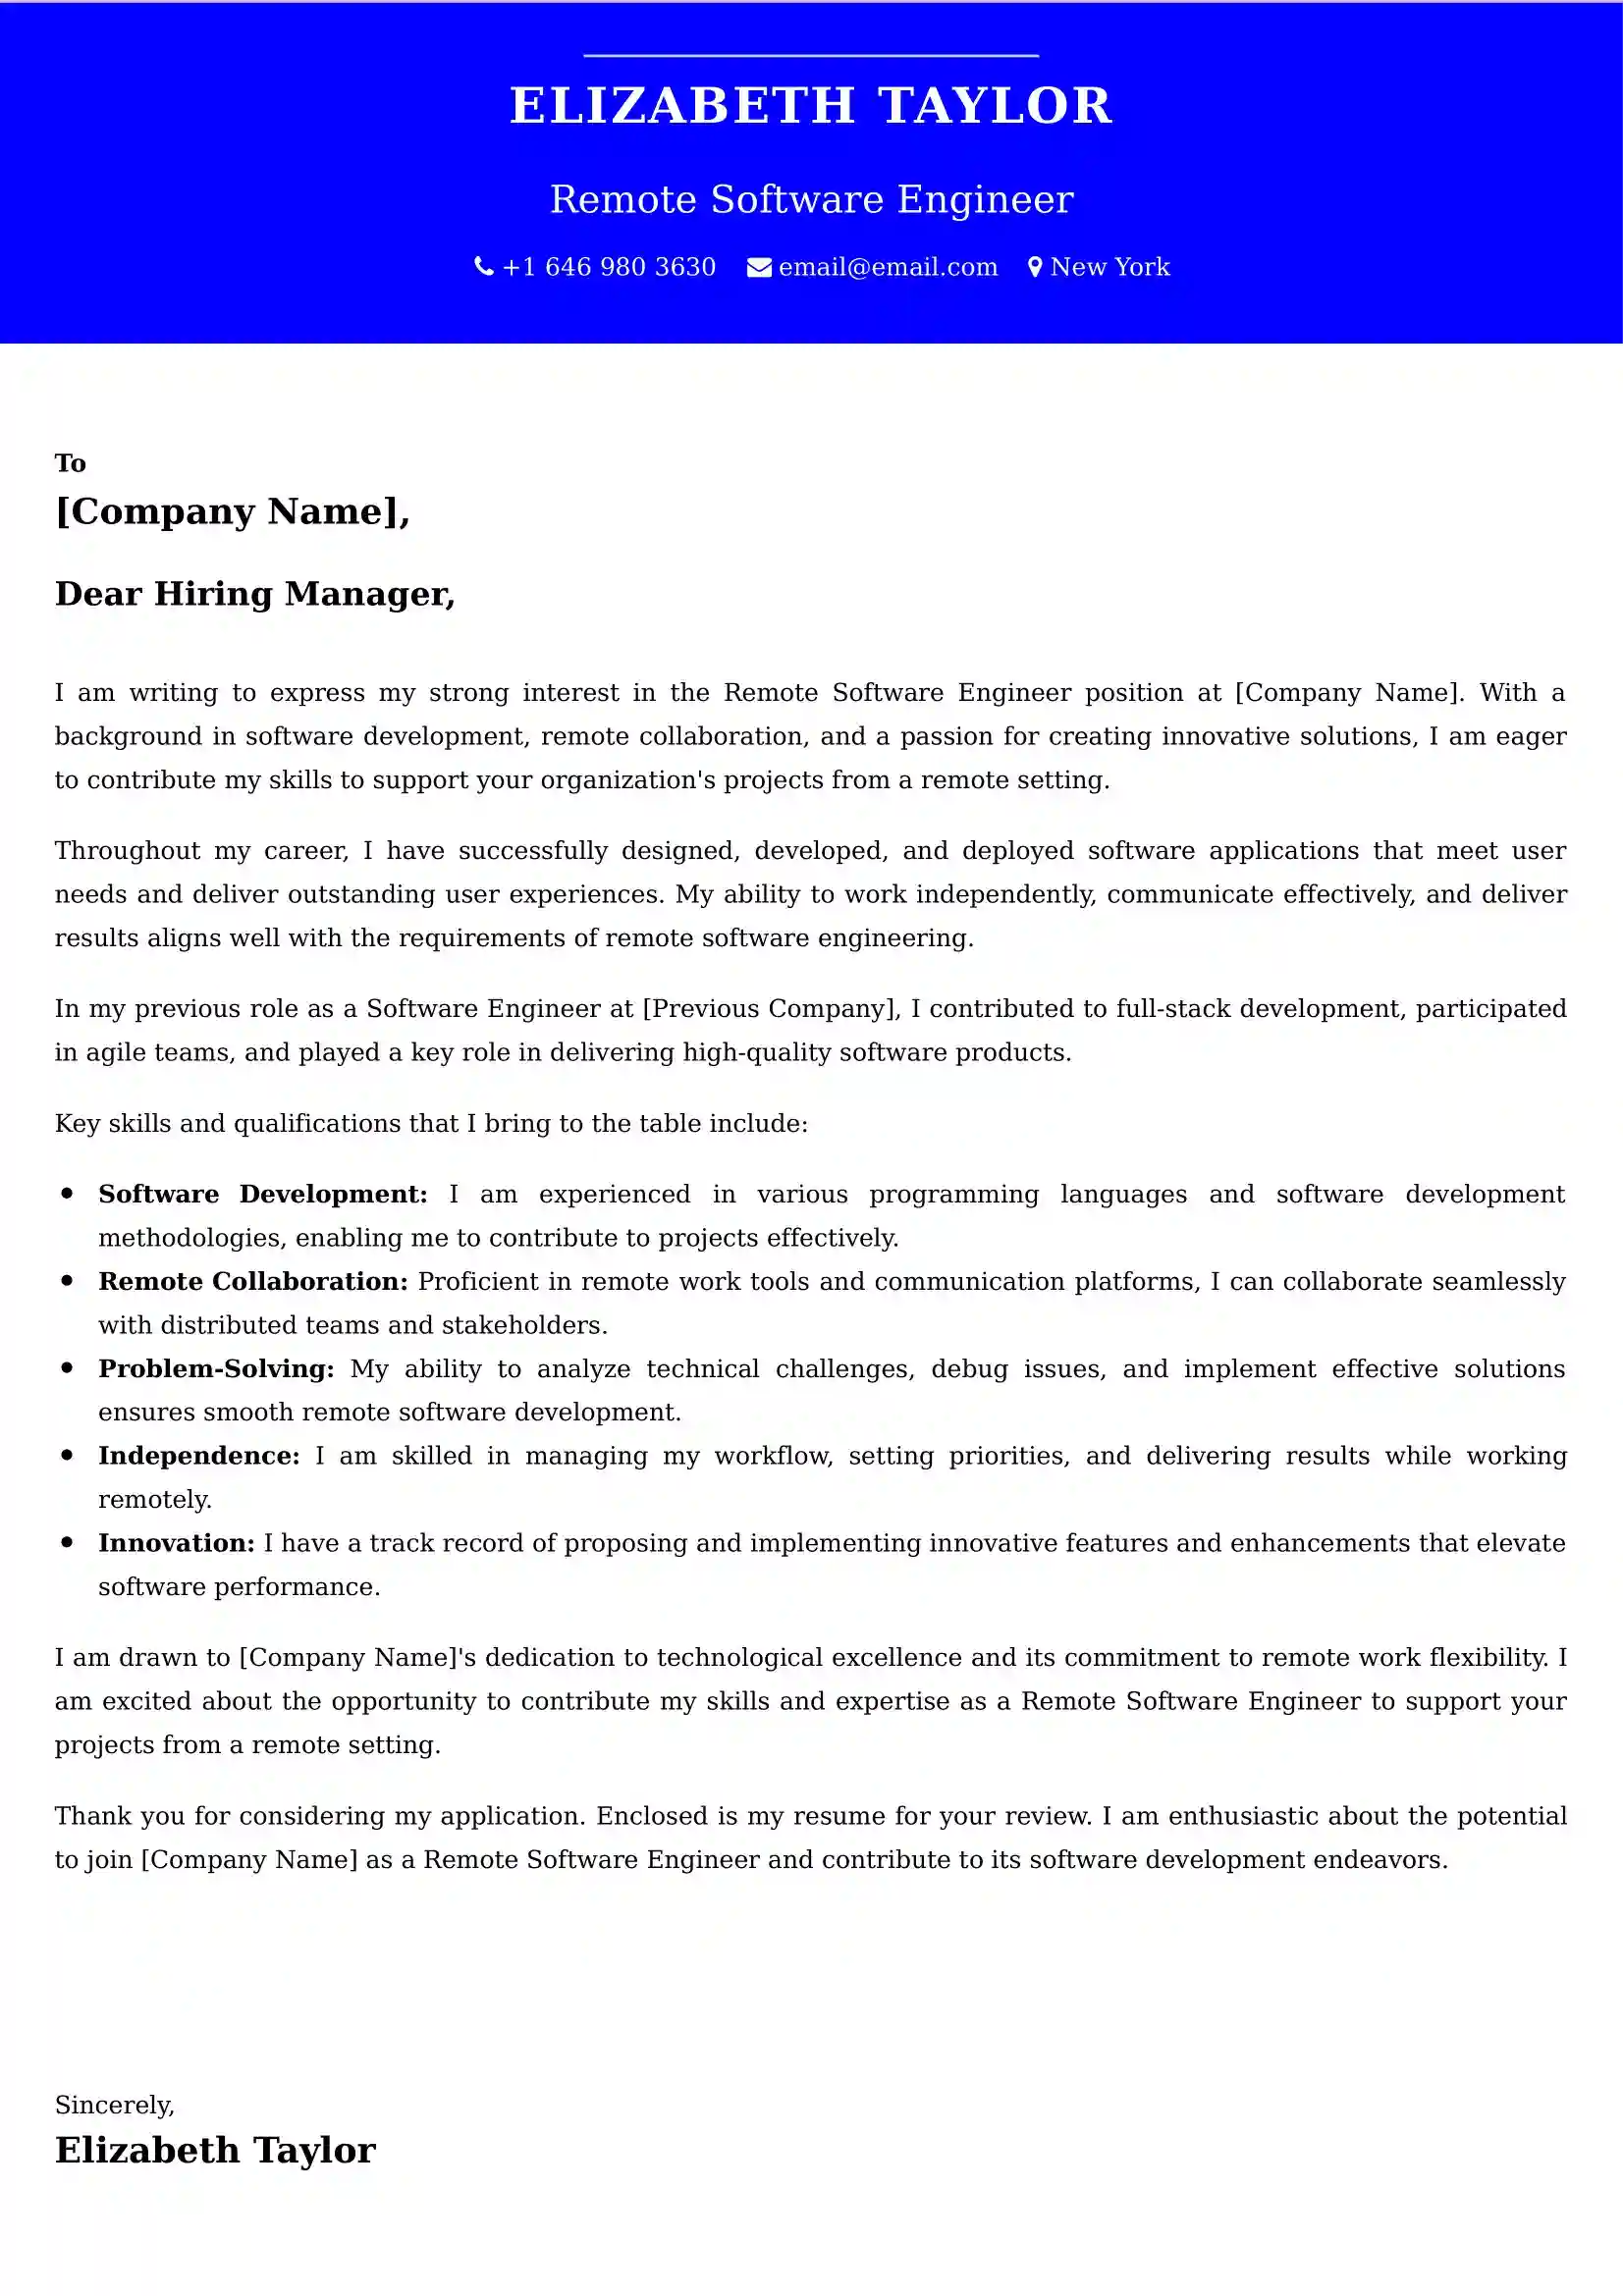 Remote Software Engineer Cover Letter Examples - Latest UK Format